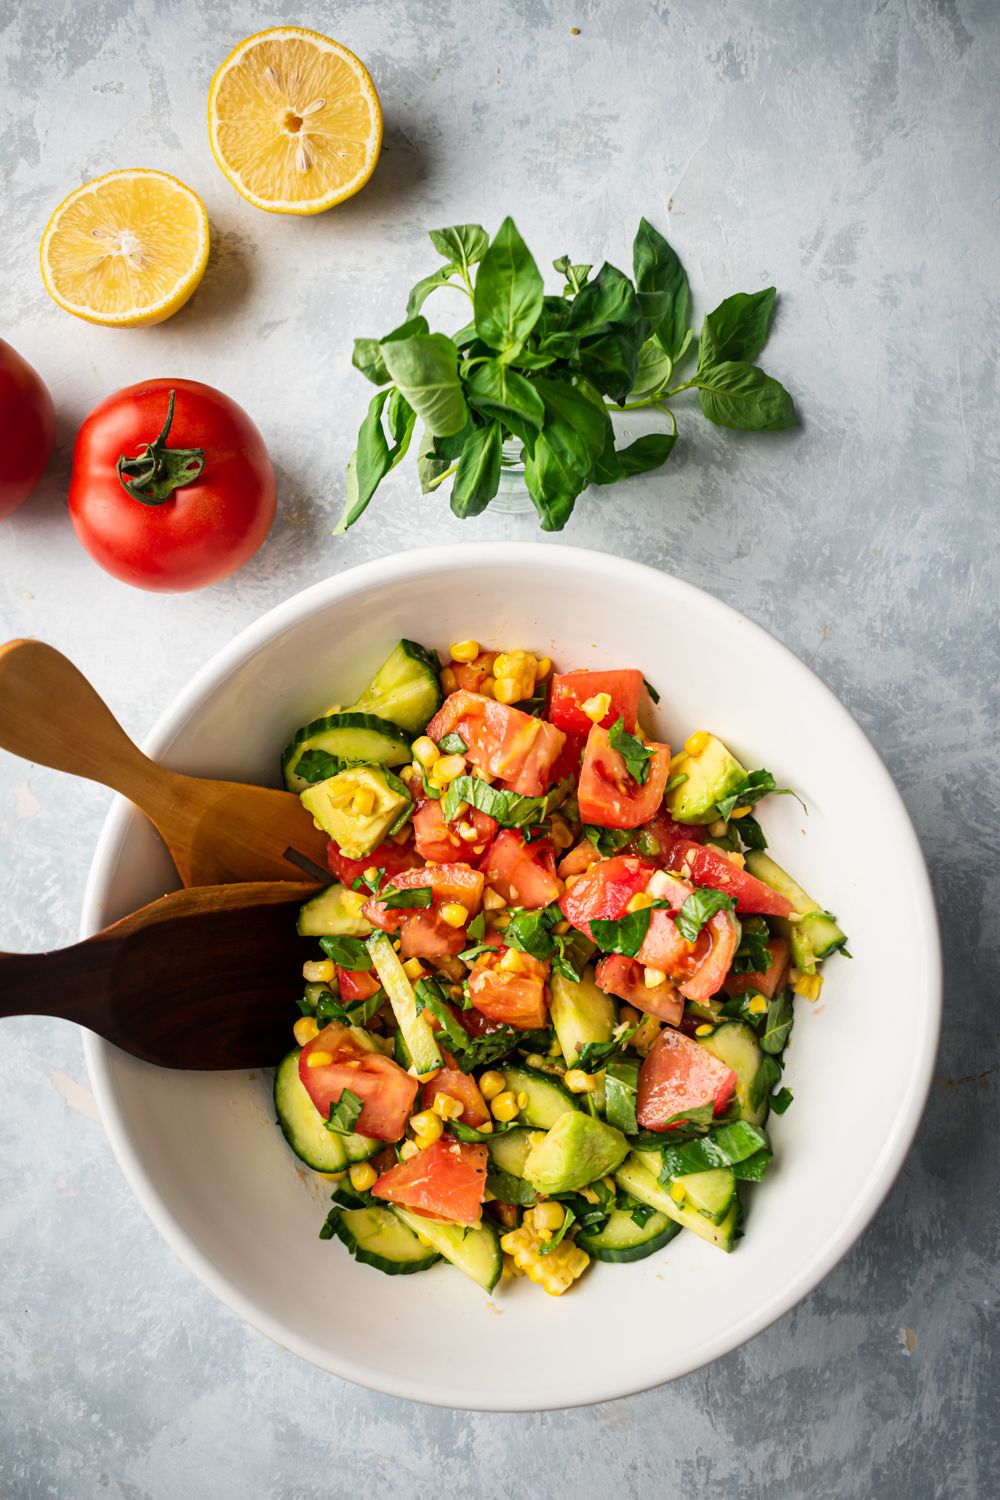 Cucumber, tomato, and avocado salad with fresh basil and lemons in a bowl.